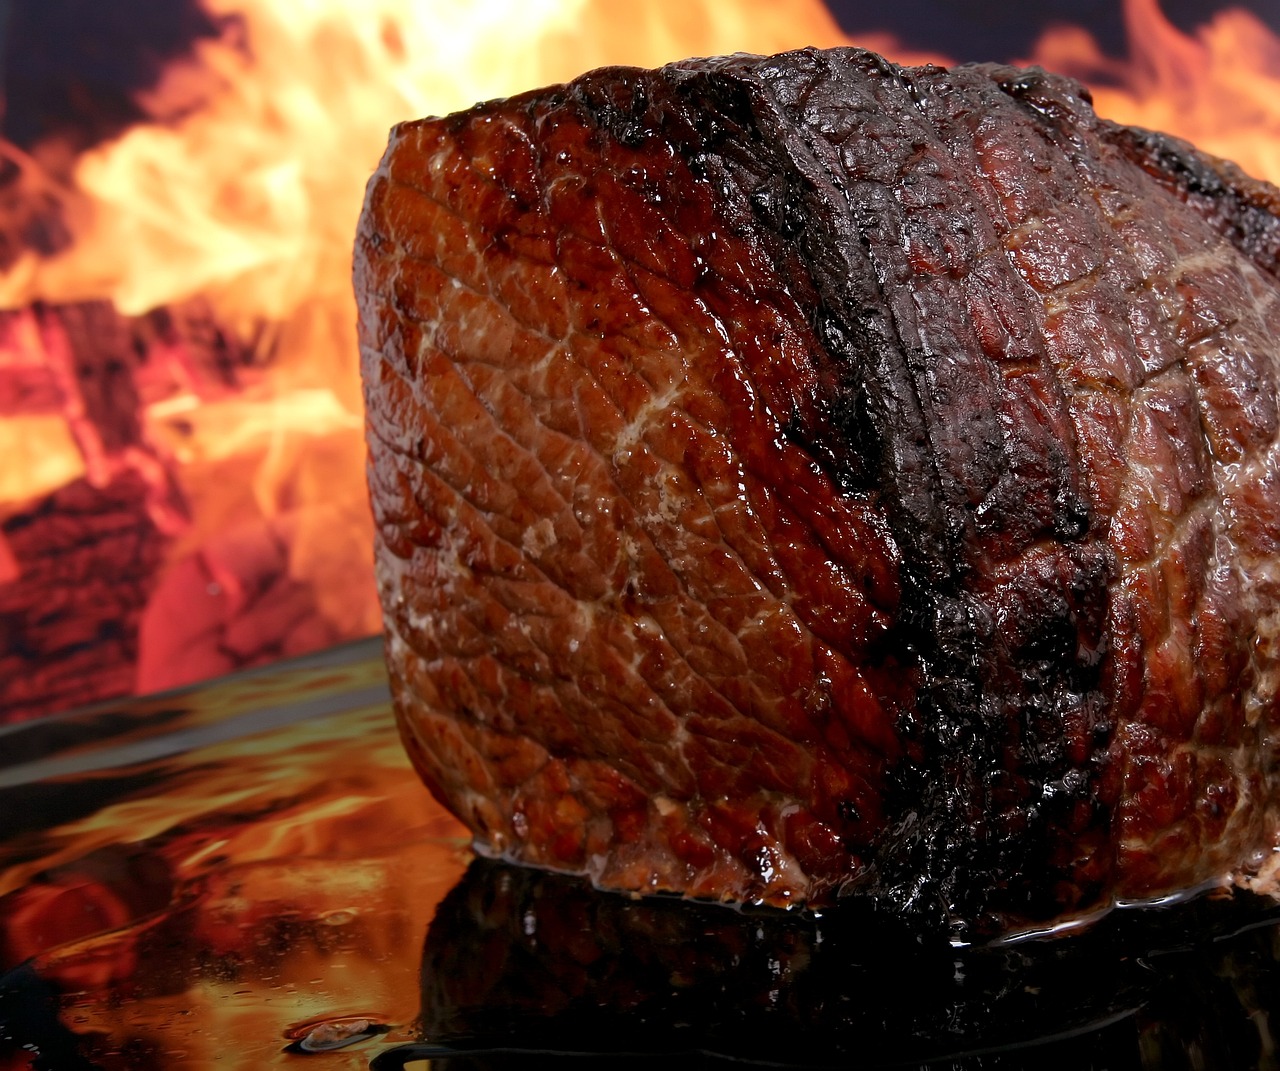 A large hunk of meat with flames behind it